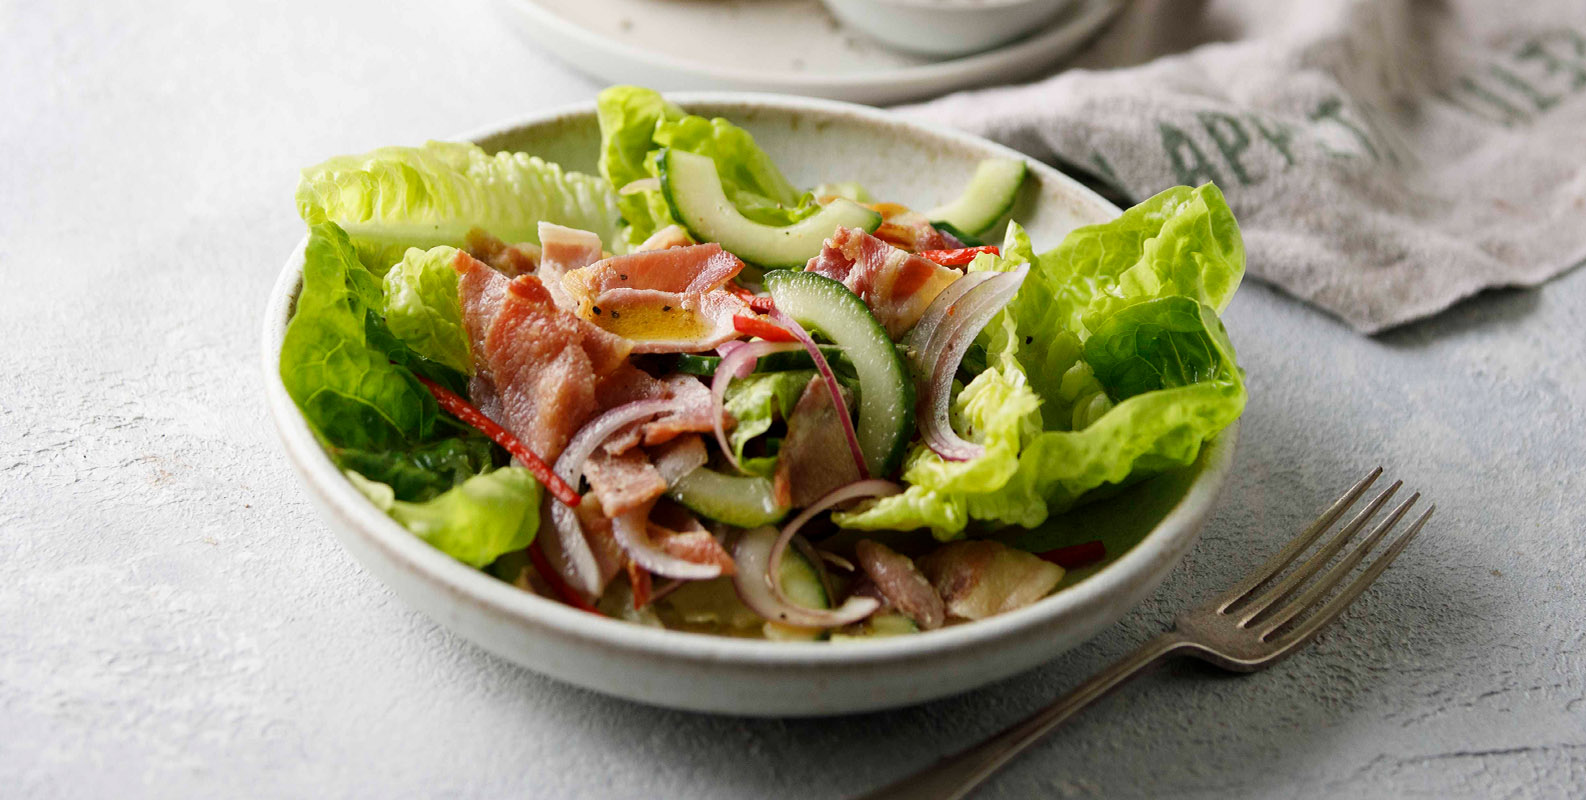 GRILLED BACK RASHERS & CUCUMBER SALAD WITH MAPLE SYRUP DRESSING - Best Bacon Recipes